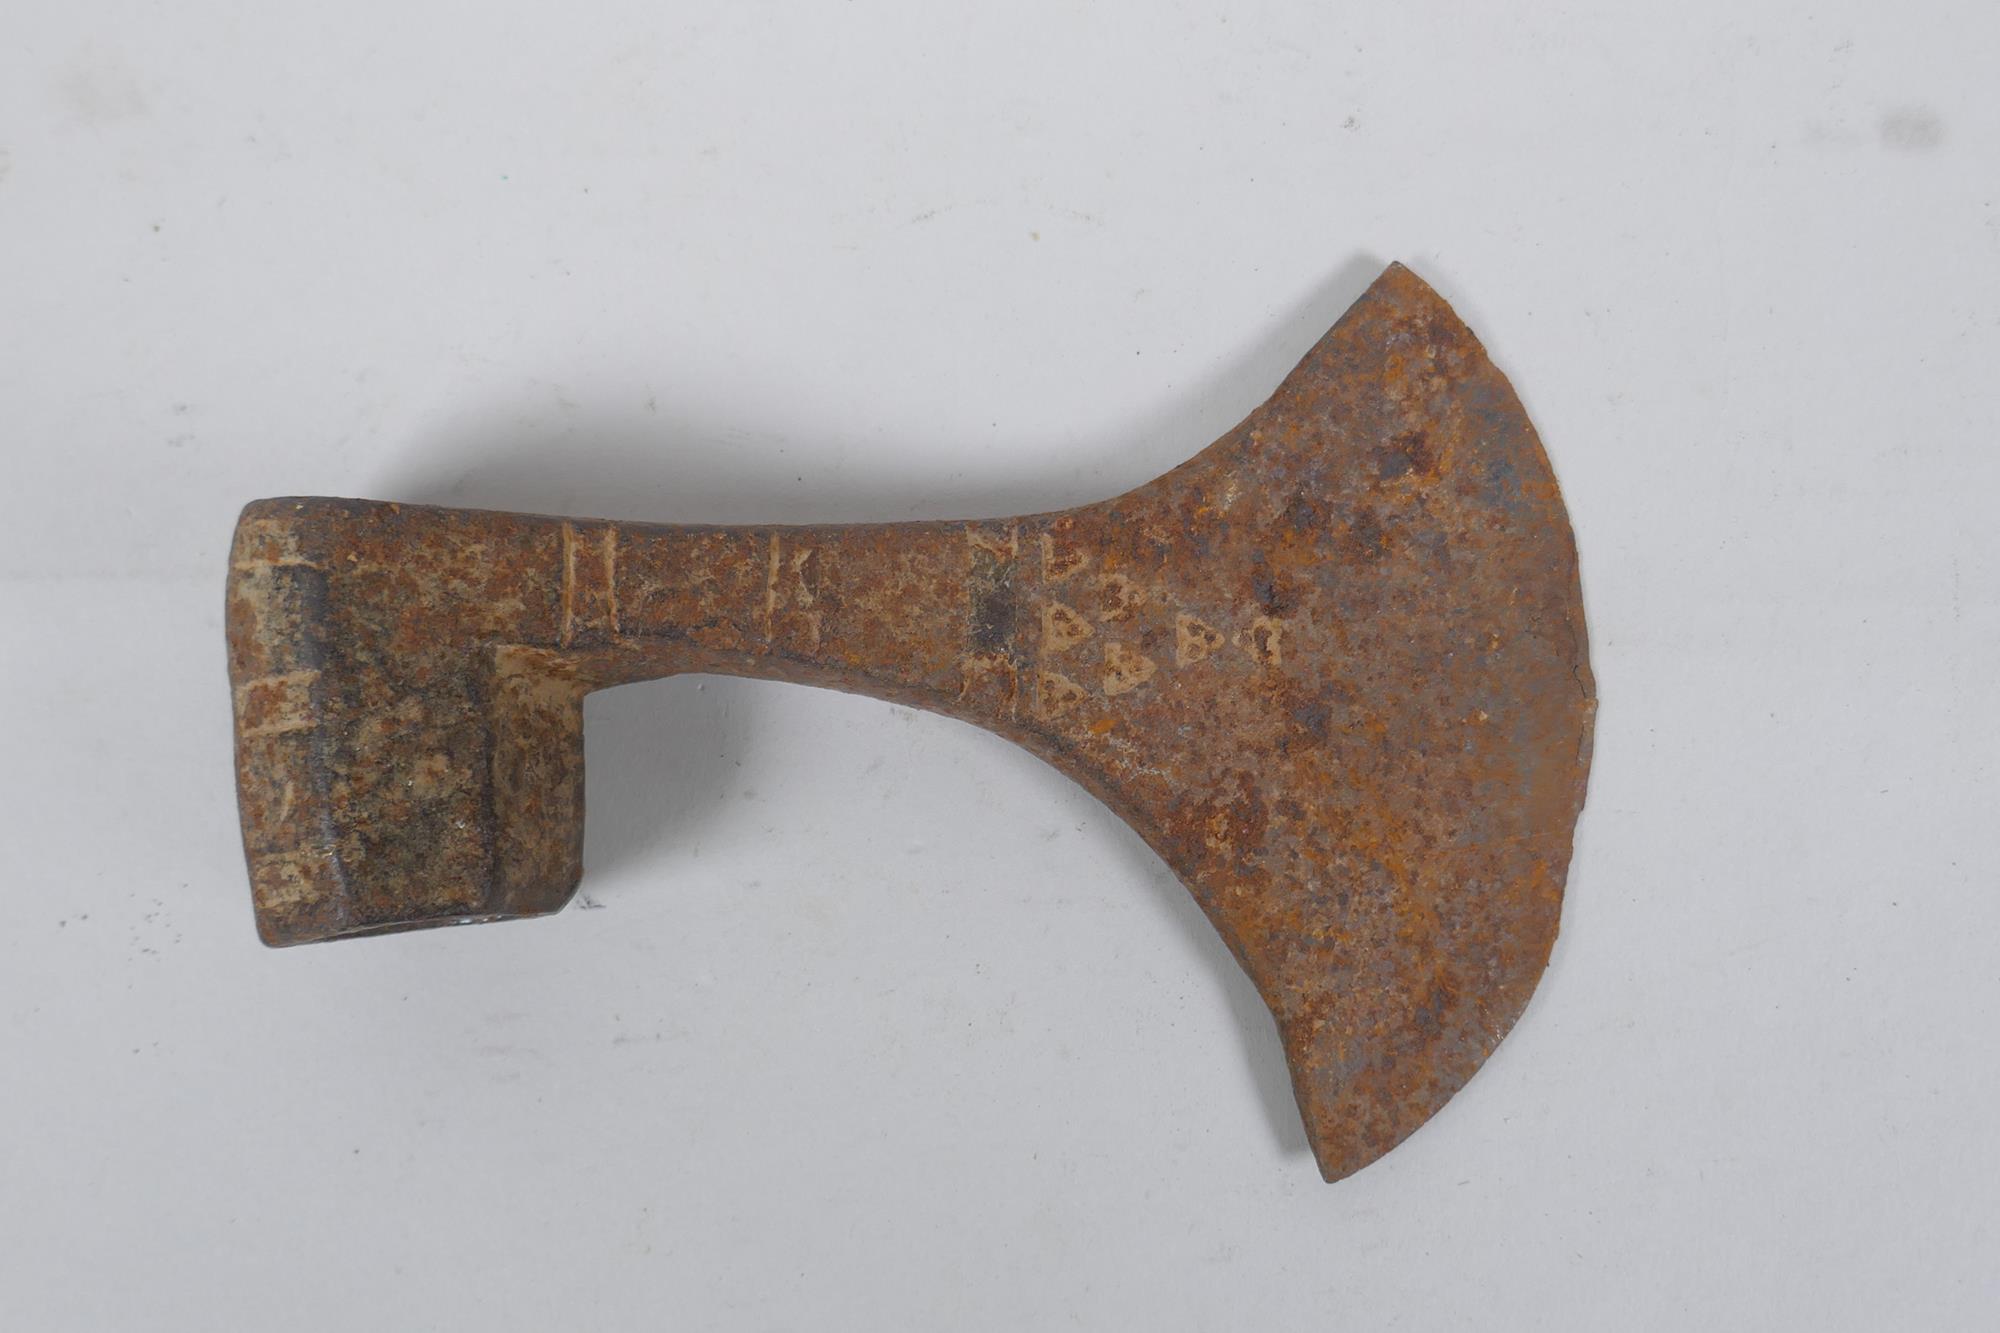 An early European horseman's axe head, possibly C14th, 16 x 11cm - Image 2 of 2